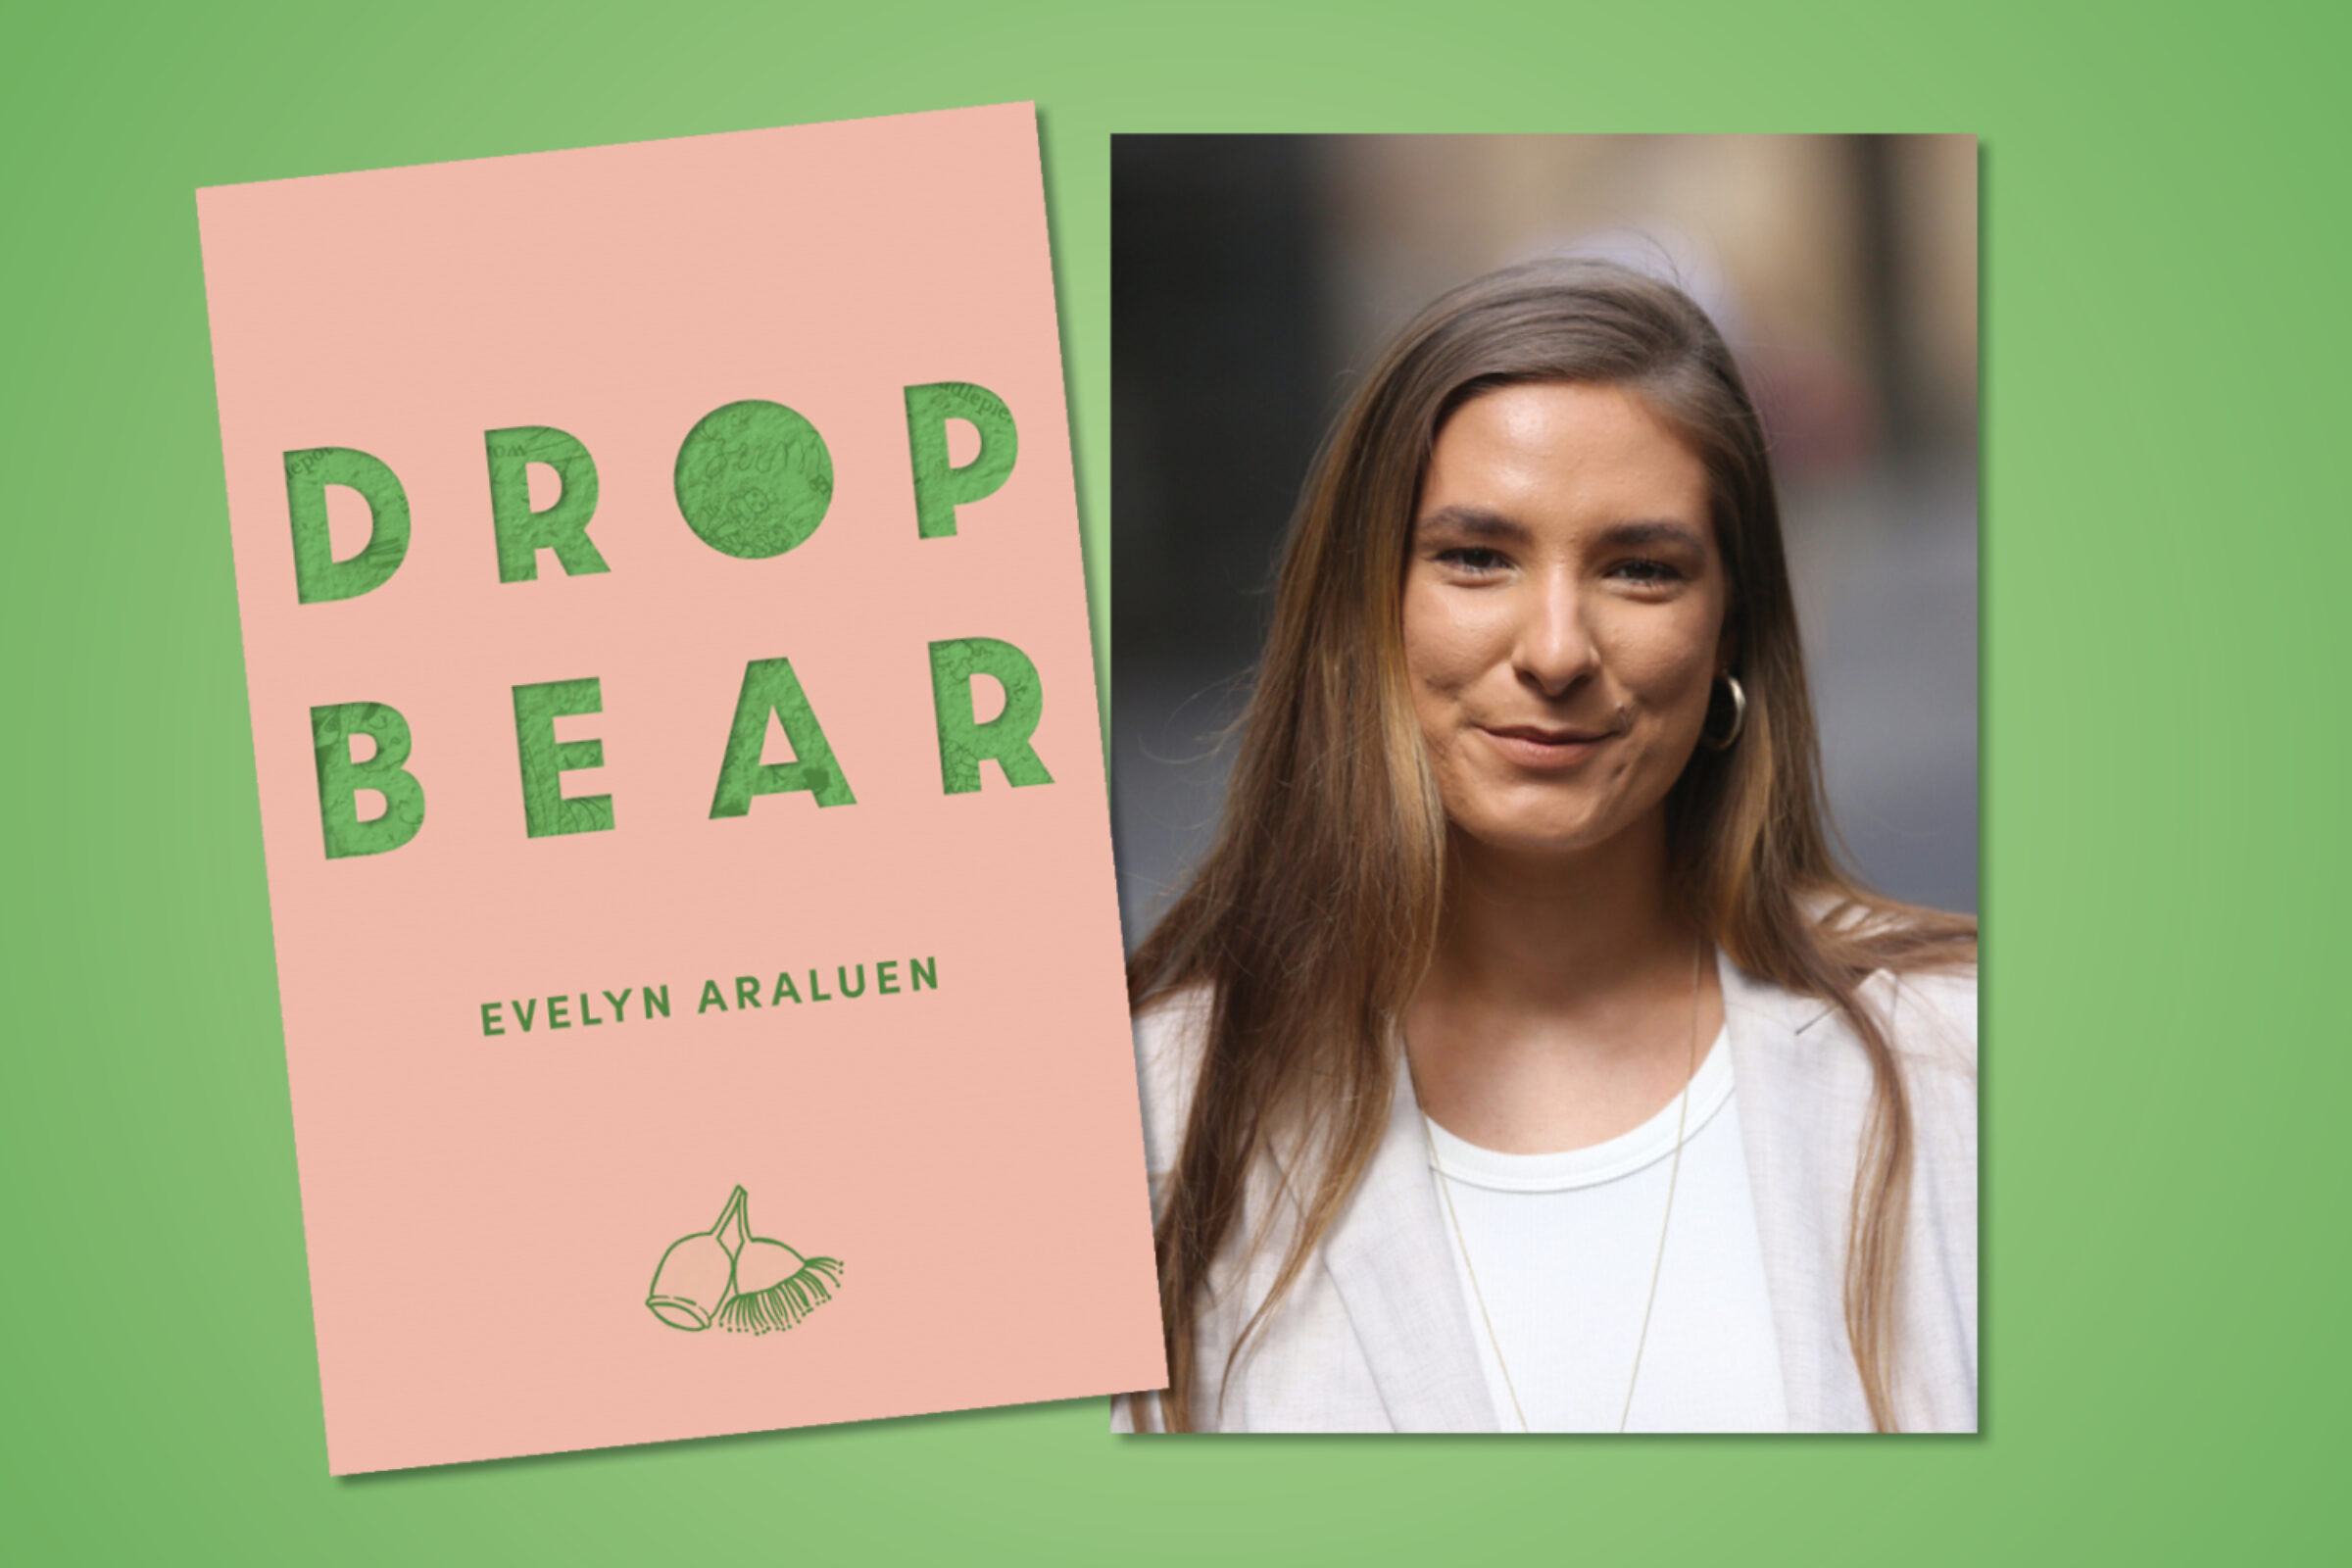 Cover art for Evelyn Araluen's book Dropbear next to a portrait of Evelyn Araluen over a green background.